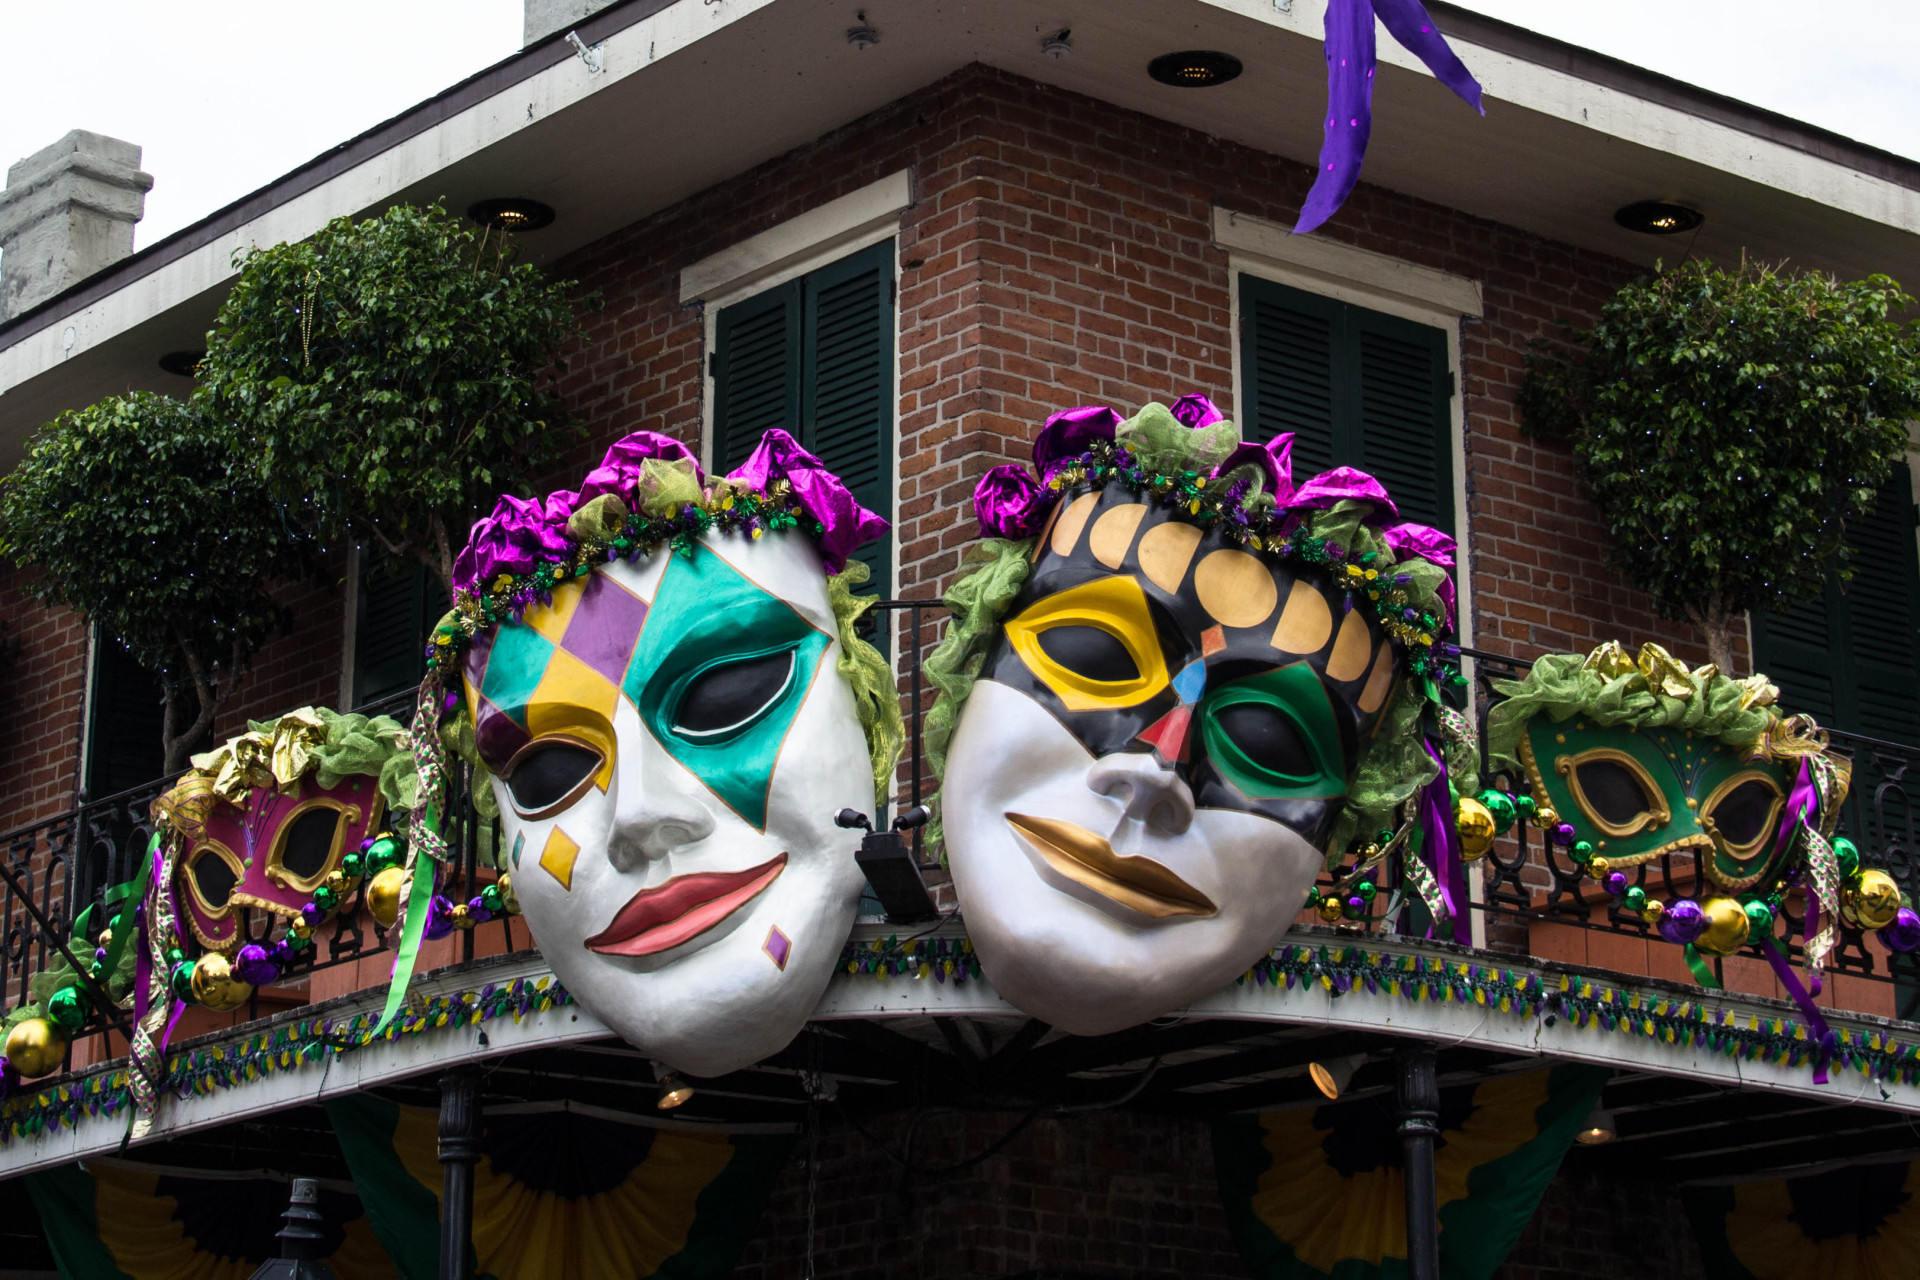 If you can, plan to hit the town for Mardi Gras! The streets come alive with costume masks, parades, dancing, and so much more. A definite bucket list experience.<p>You may also like:<a href="https://www.starsinsider.com/n/270905?utm_source=msn.com&utm_medium=display&utm_campaign=referral_description&utm_content=163359v6en-en"> Celebrities who love (and regret) their couple tattoos</a></p>